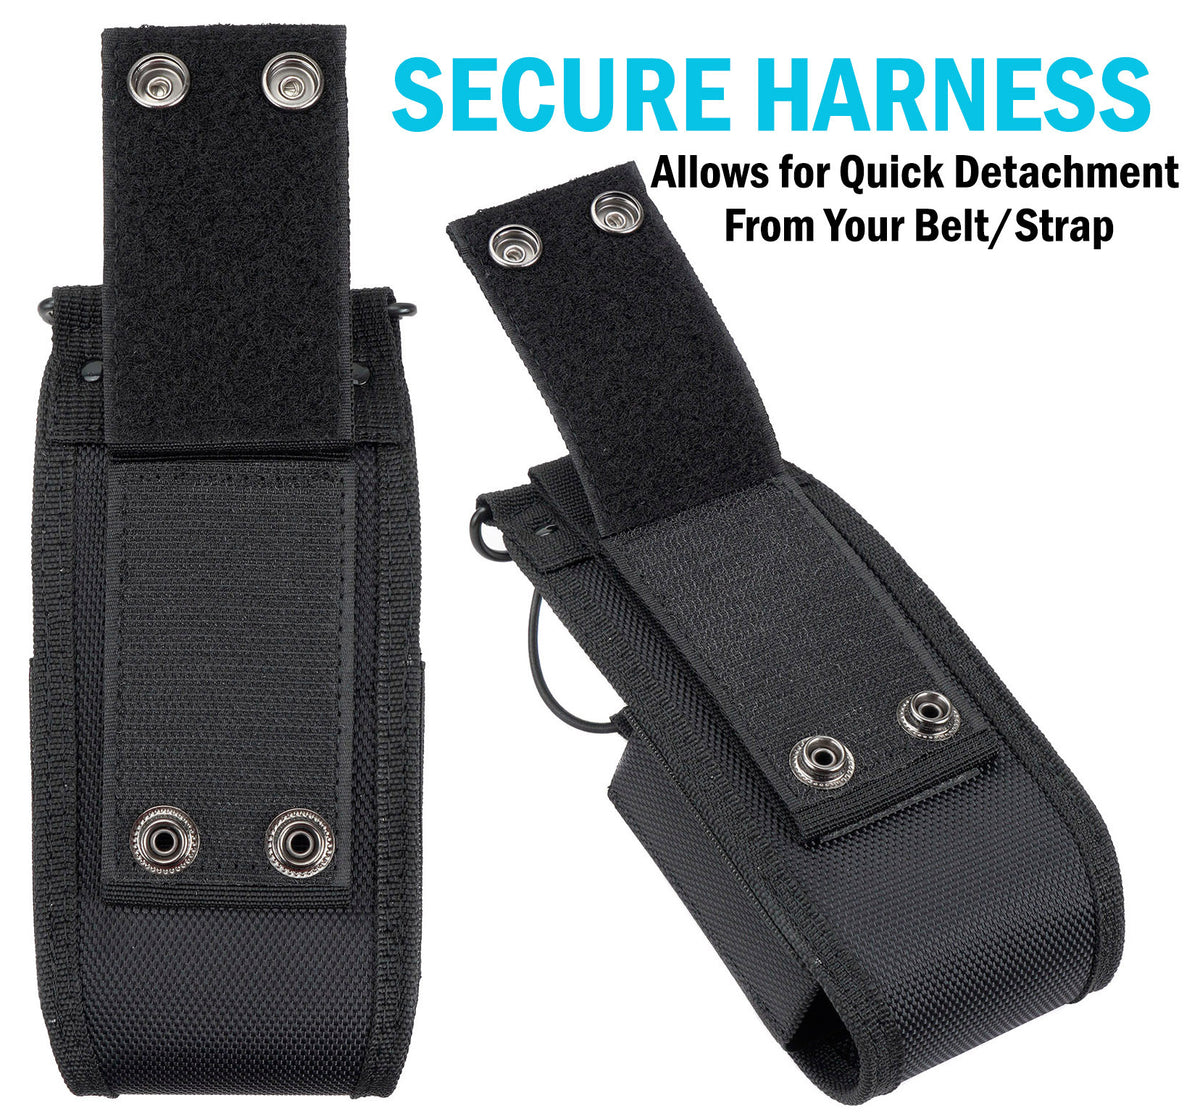 Phone Sheath for Backpack Straps – Trailboundco